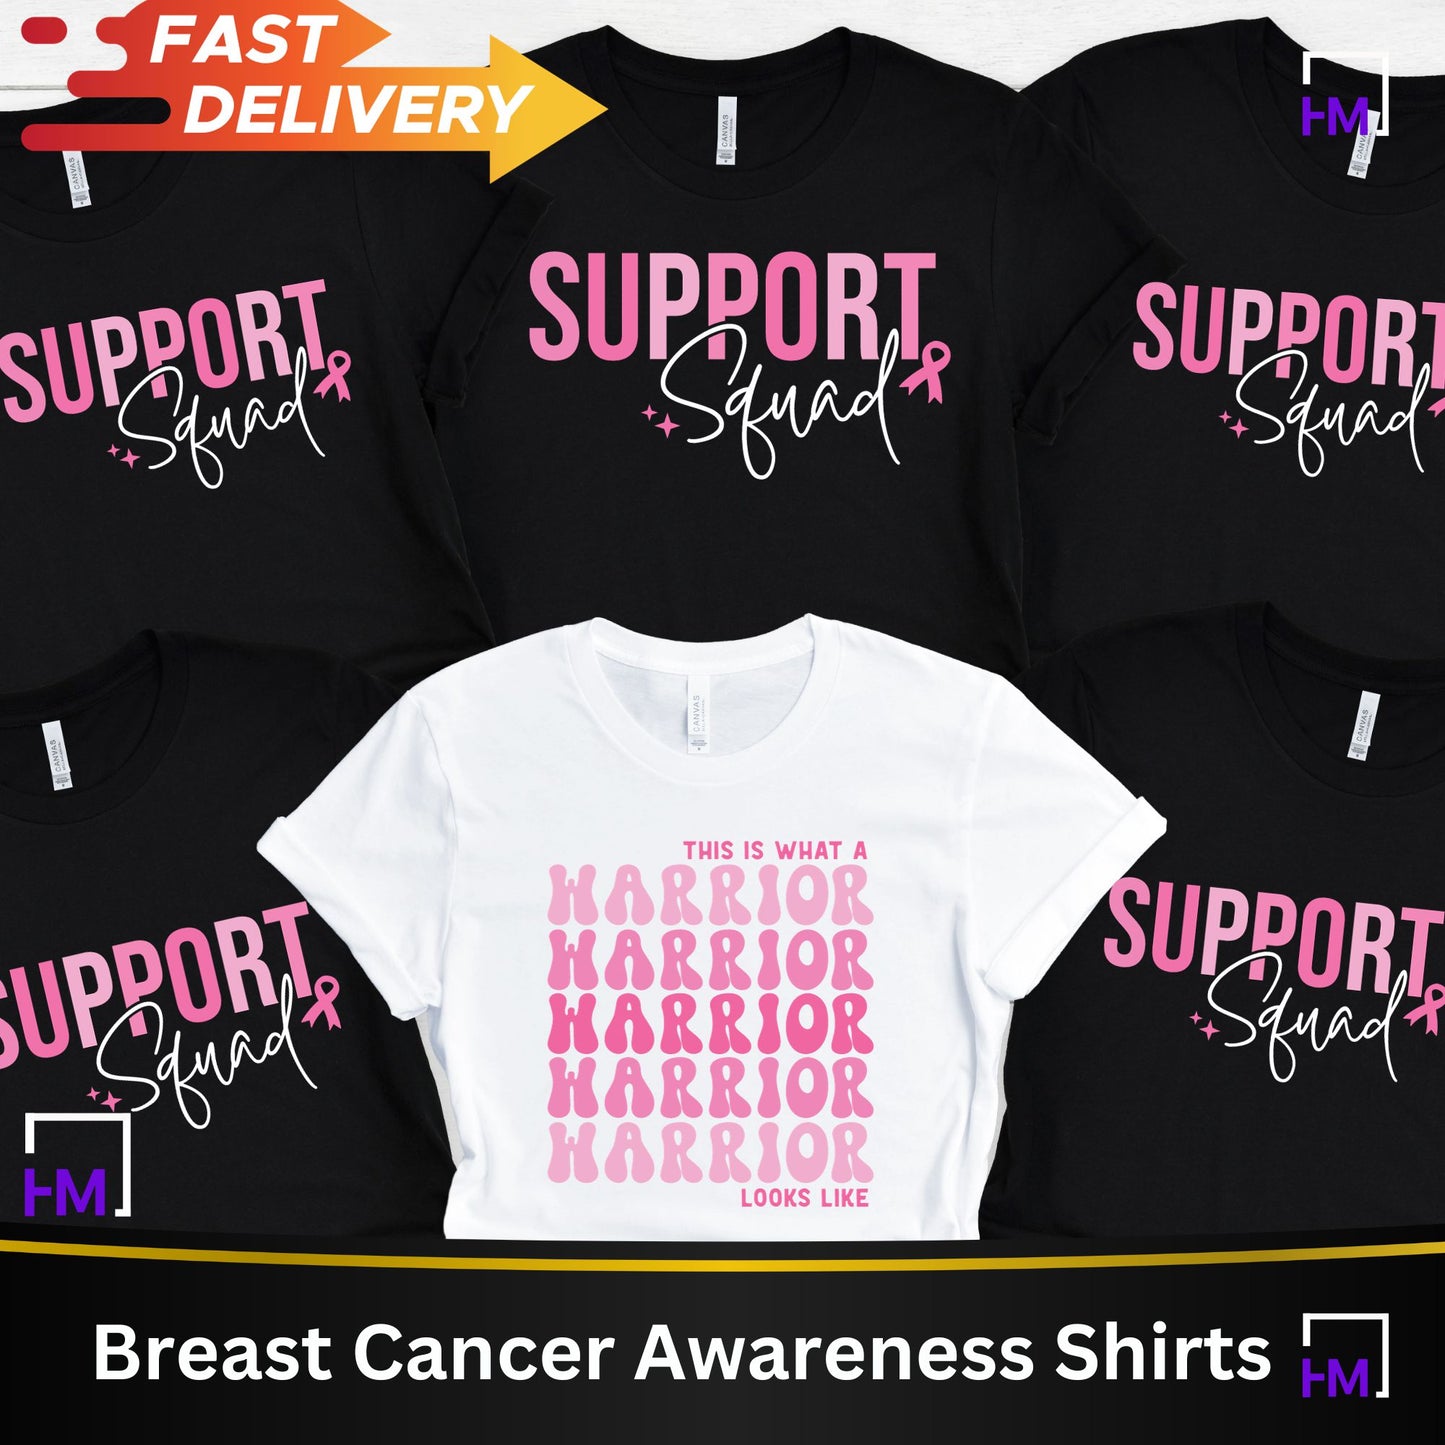 This is What a Warrior Looks Like Breast Cancer Awareness Family Shirts